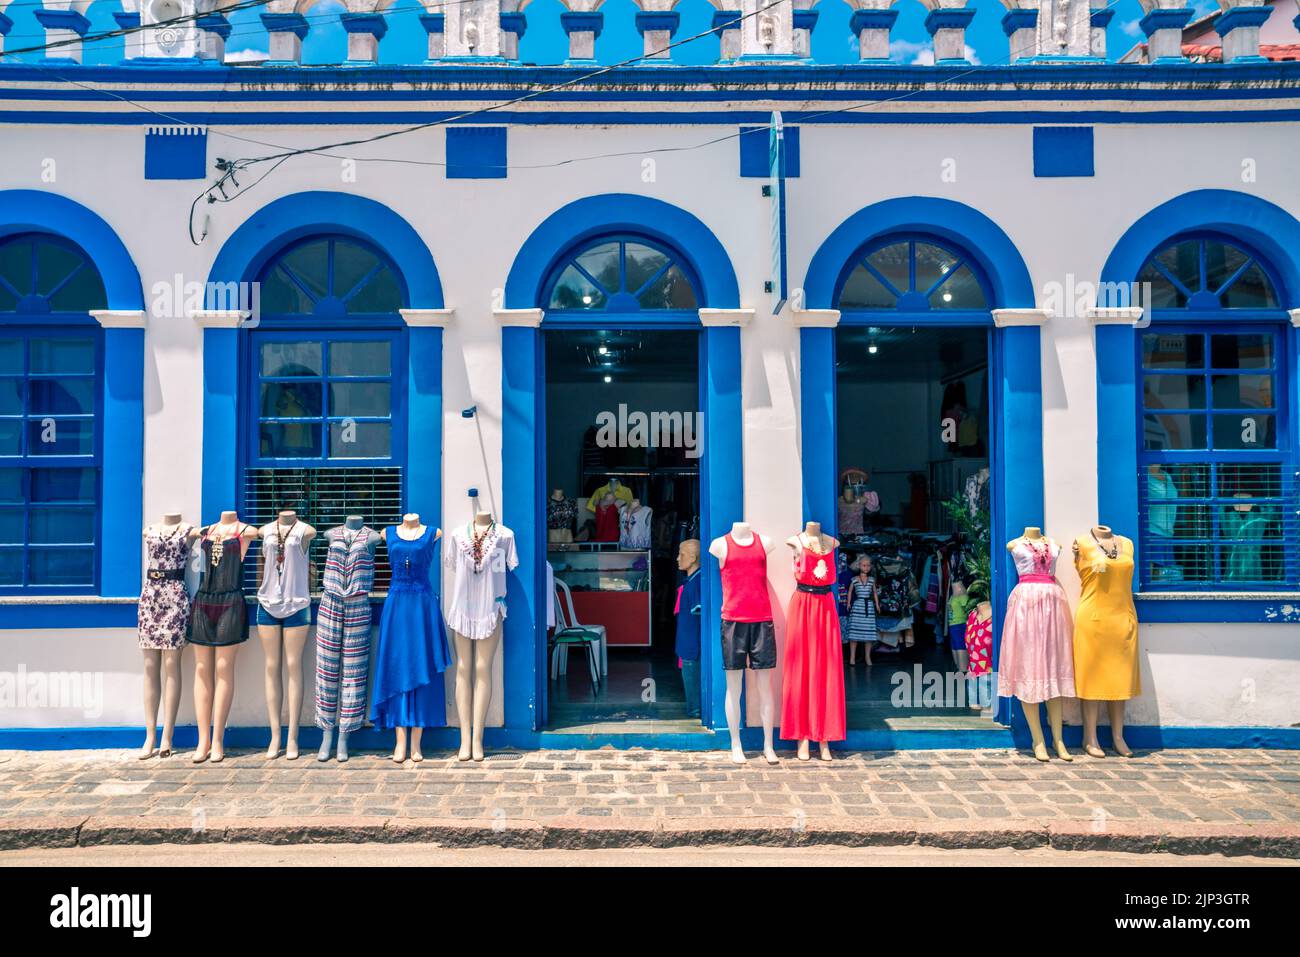 Façade of a clothing store with mannequins display on the sidewalk Stock Photo